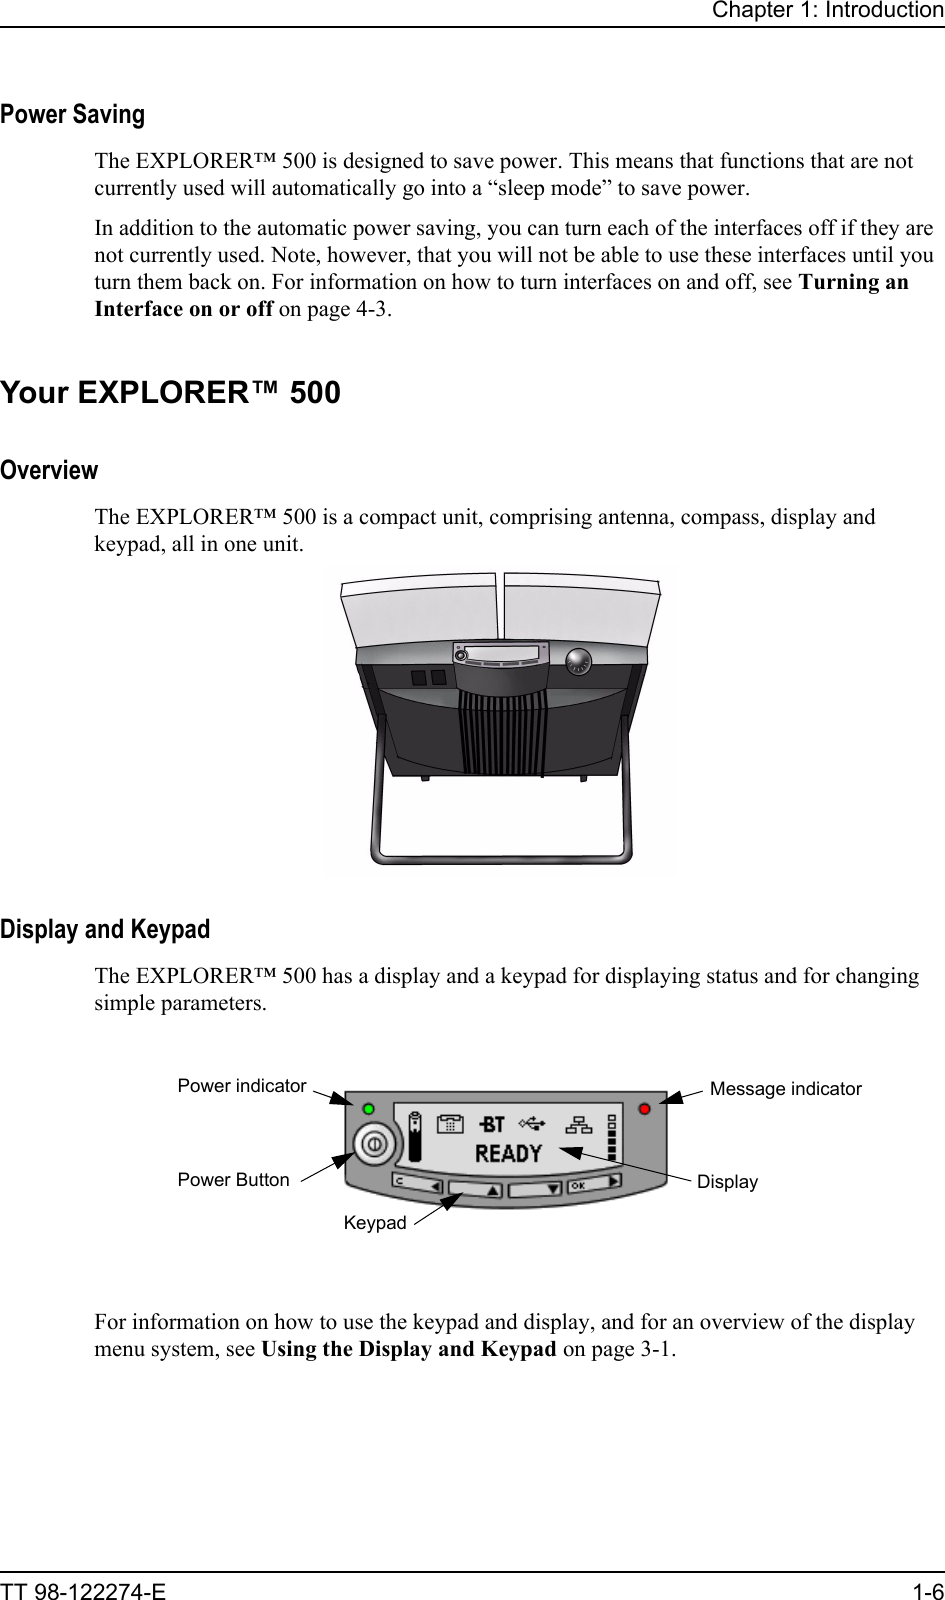 Chapter 1: IntroductionTT 98-122274-E 1-6Power SavingThe EXPLORER™ 500 is designed to save power. This means that functions that are not currently used will automatically go into a “sleep mode” to save power.In addition to the automatic power saving, you can turn each of the interfaces off if they are not currently used. Note, however, that you will not be able to use these interfaces until you turn them back on. For information on how to turn interfaces on and off, see Turning an Interface on or off on page 4-3.Your EXPLORER™ 500OverviewThe EXPLORER™ 500 is a compact unit, comprising antenna, compass, display and keypad, all in one unit.Display and KeypadThe EXPLORER™ 500 has a display and a keypad for displaying status and for changing simple parameters.For information on how to use the keypad and display, and for an overview of the display menu system, see Using the Display and Keypad on page 3-1.Power indicatorPower ButtonKeypadDisplayMessage indicator